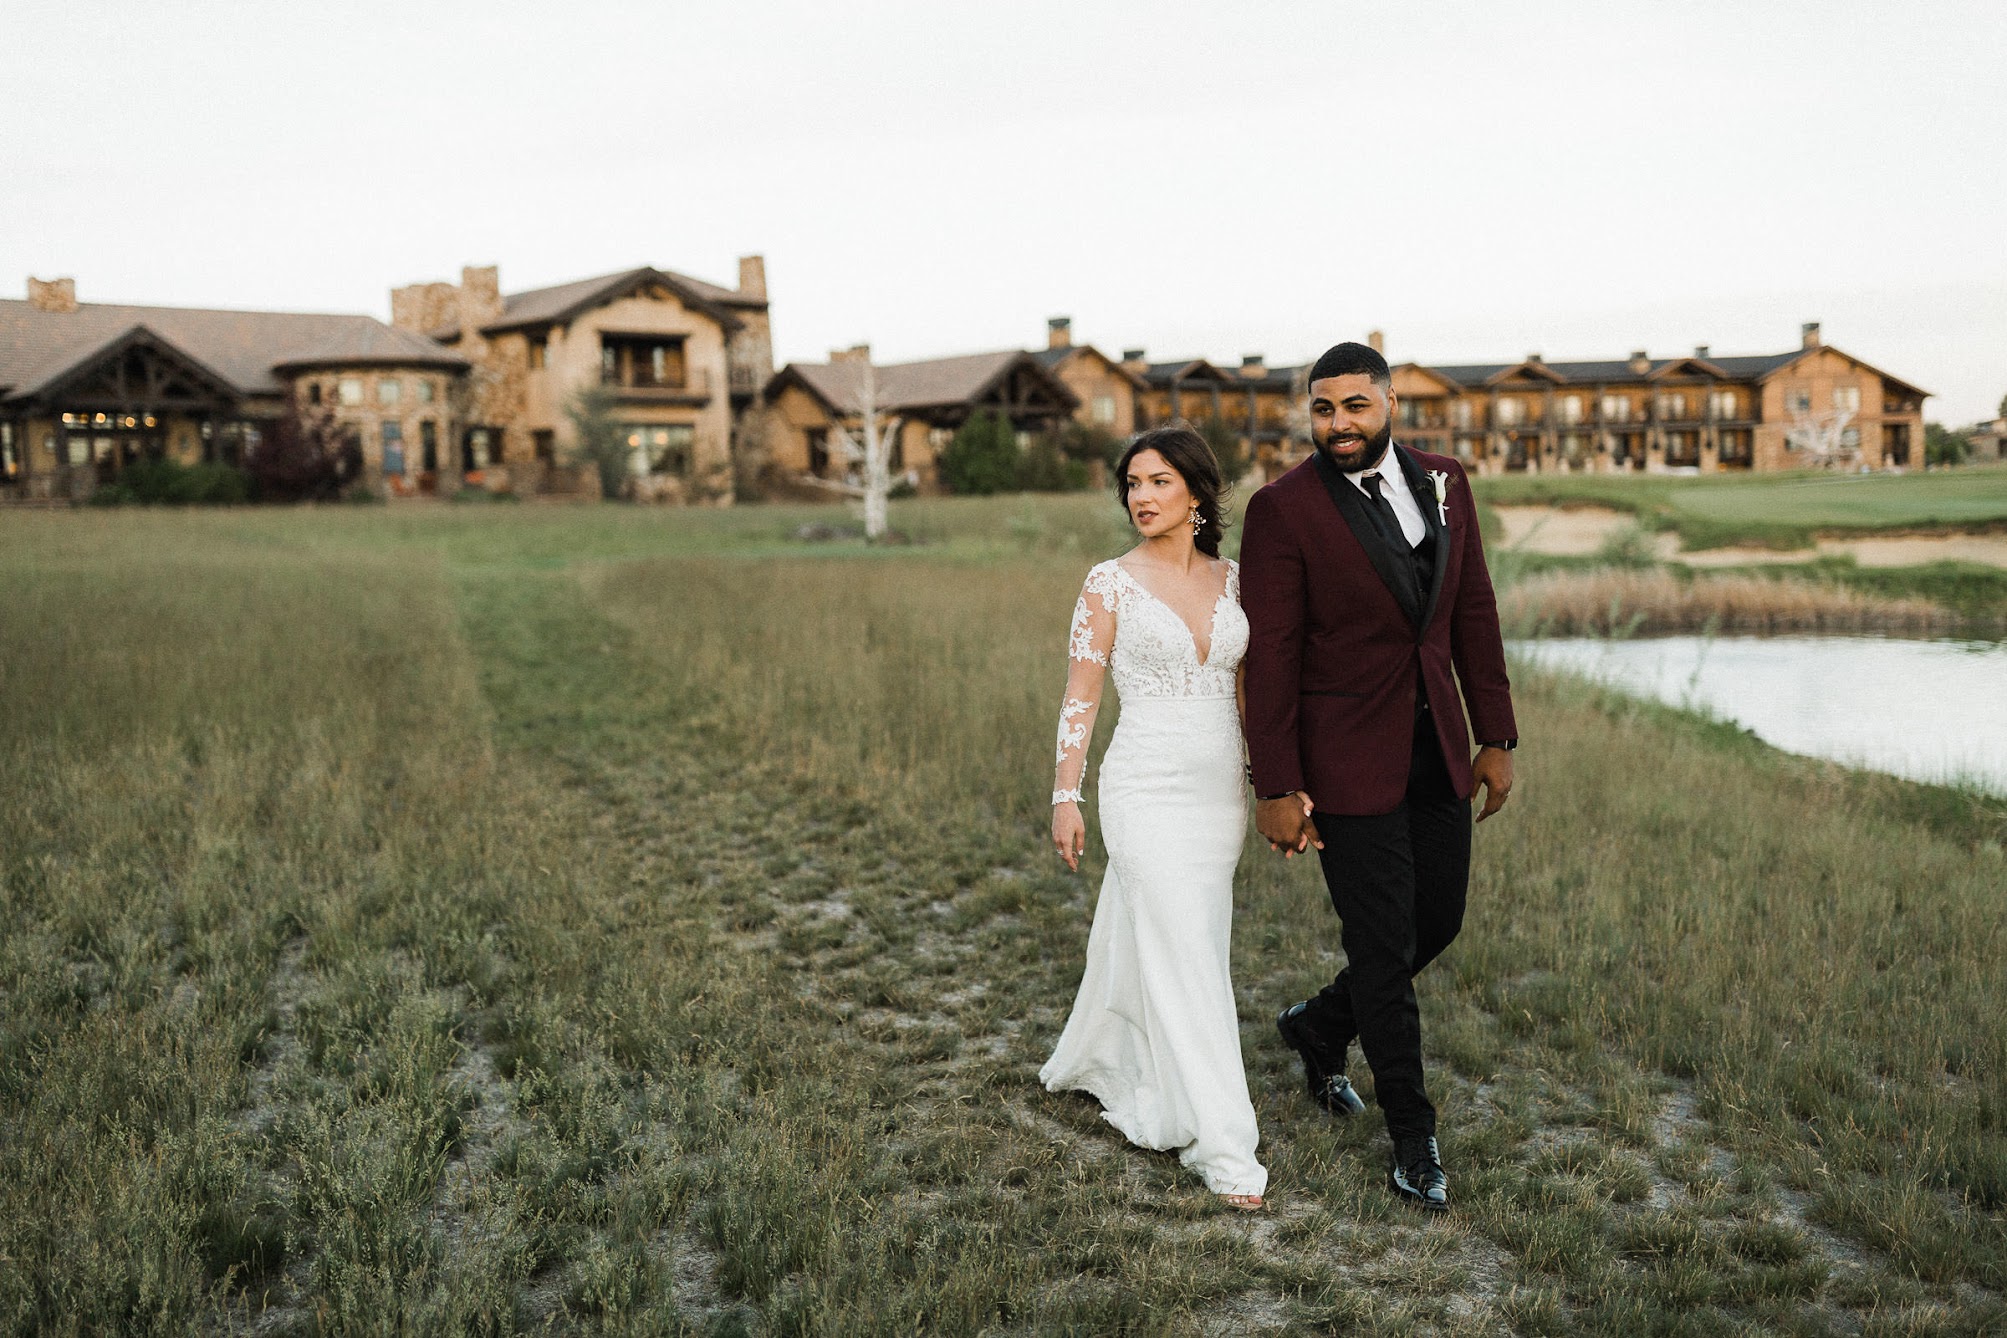 the couple walking with Pronghorn Resort, a stunning Tuscan like villa set behind them.